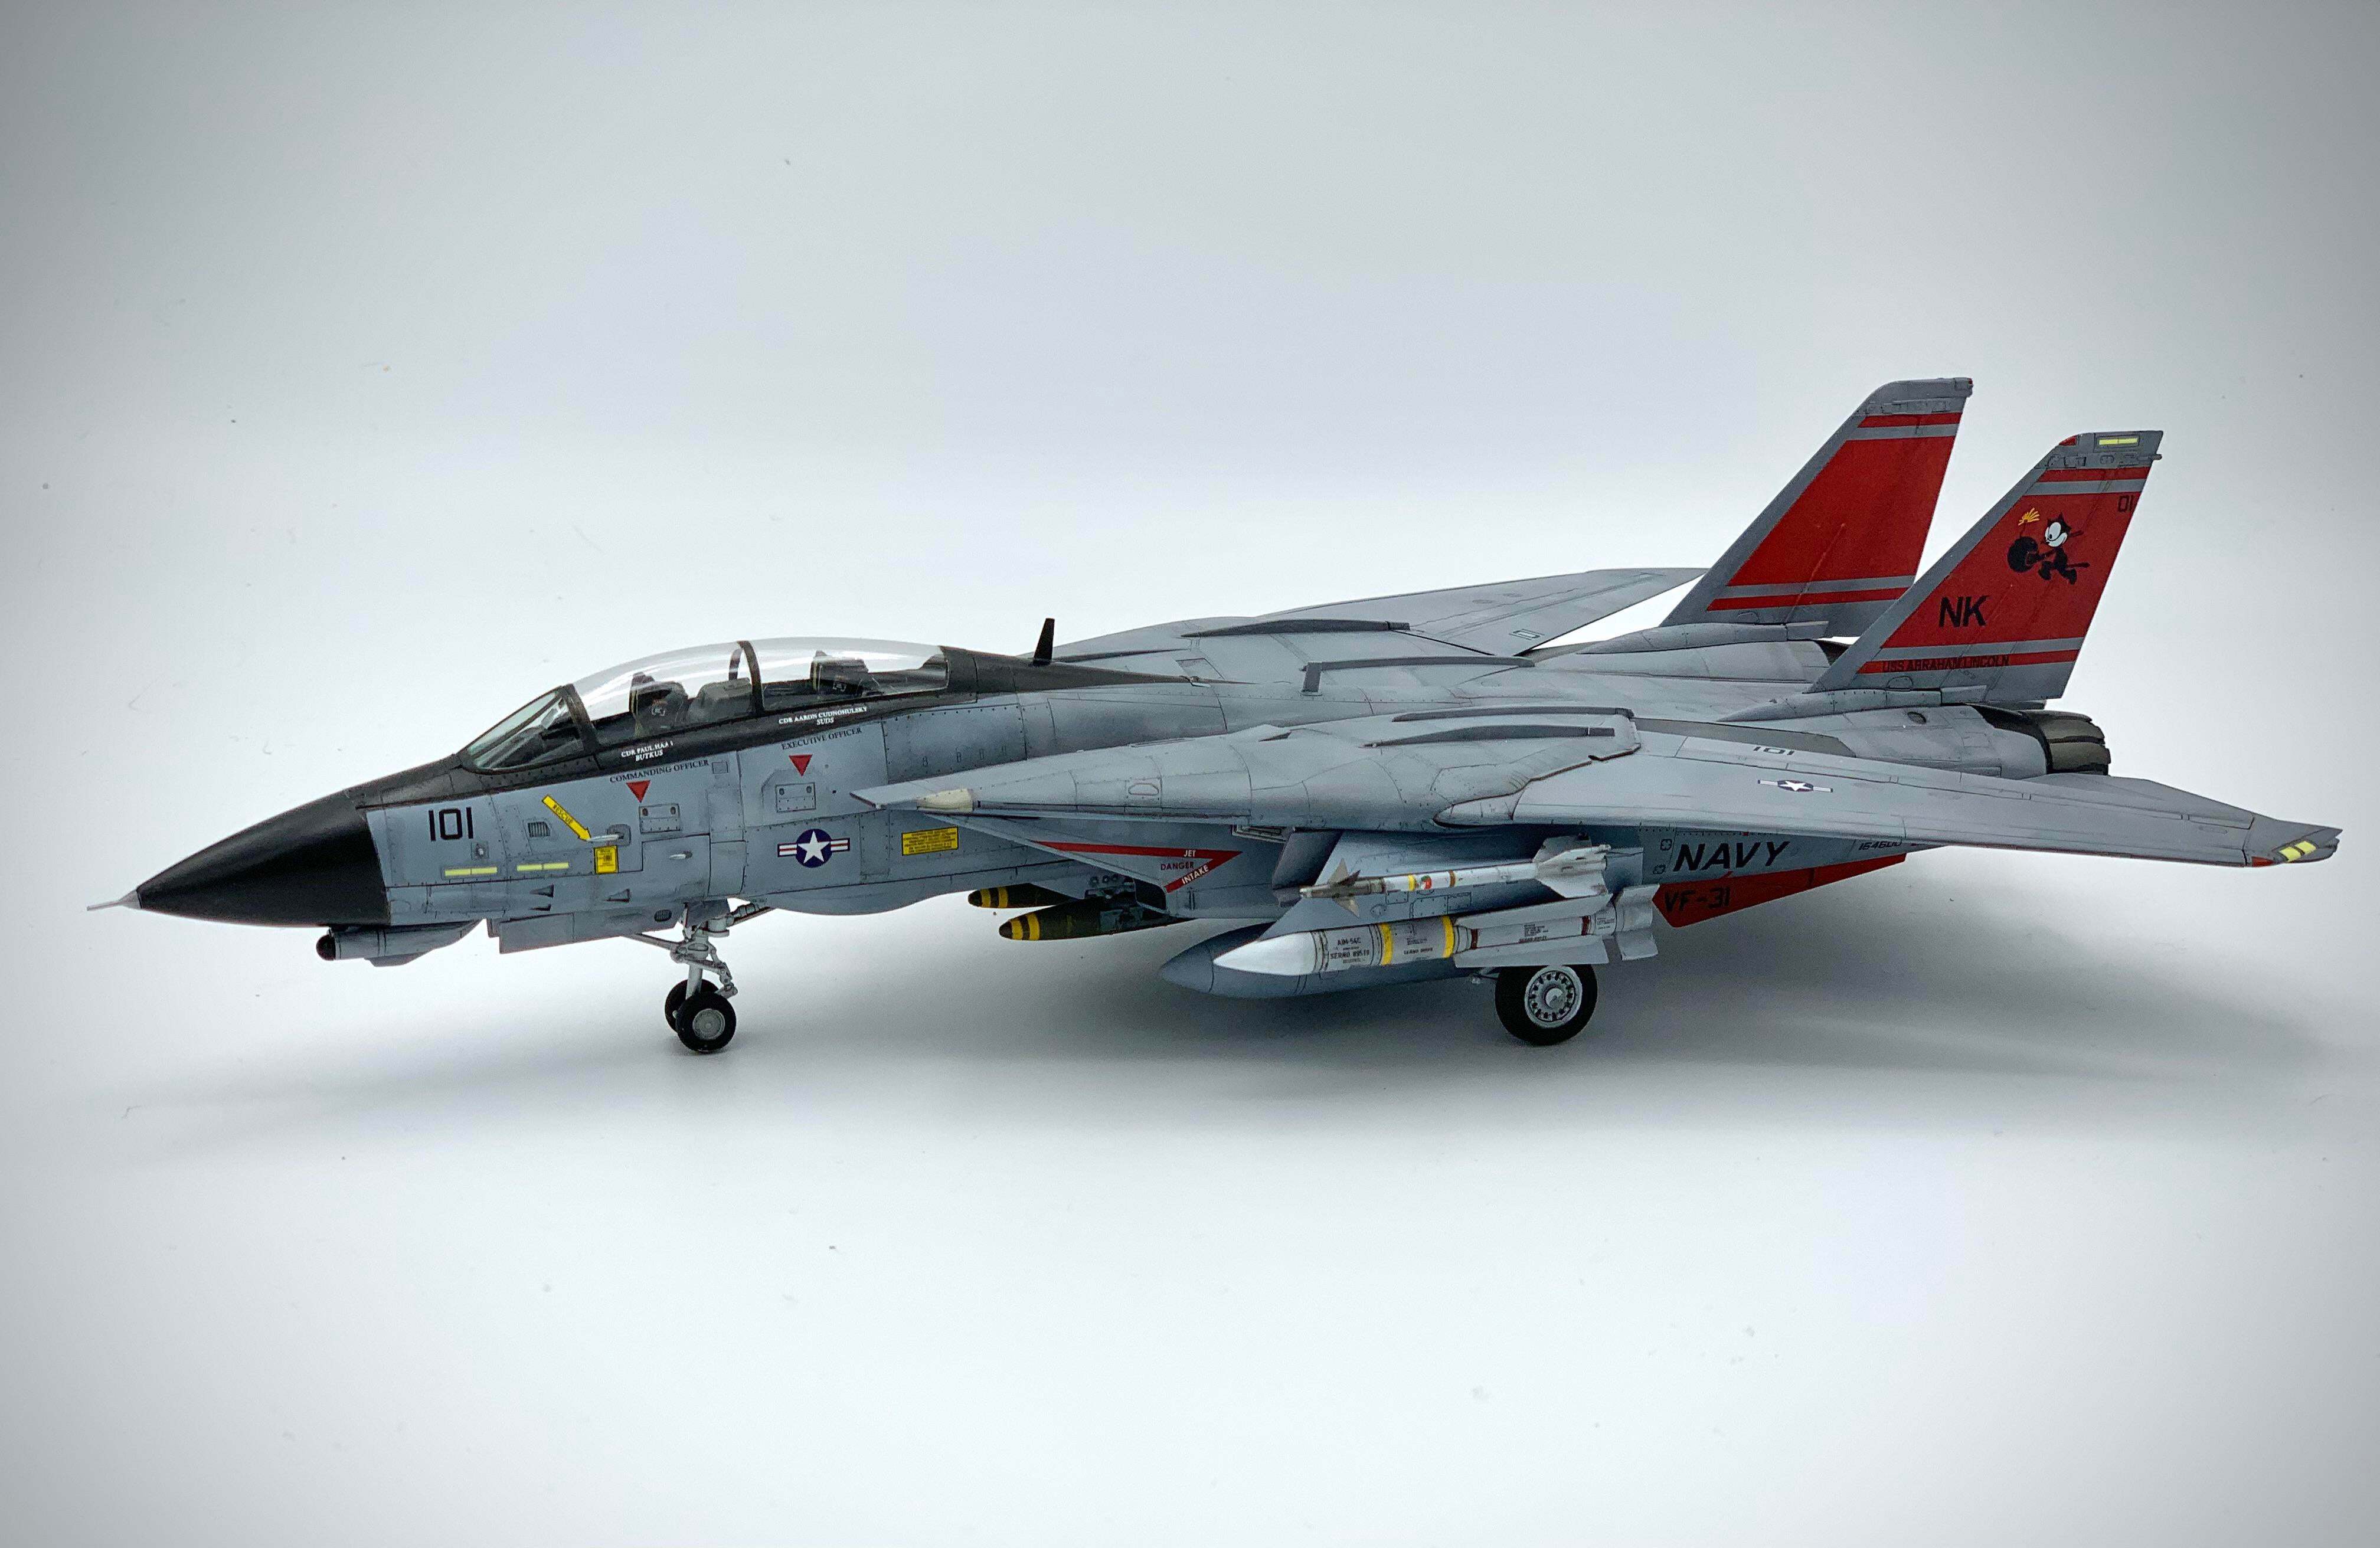 F-14D (1/72 Great Wall) from VF-31 S7ls